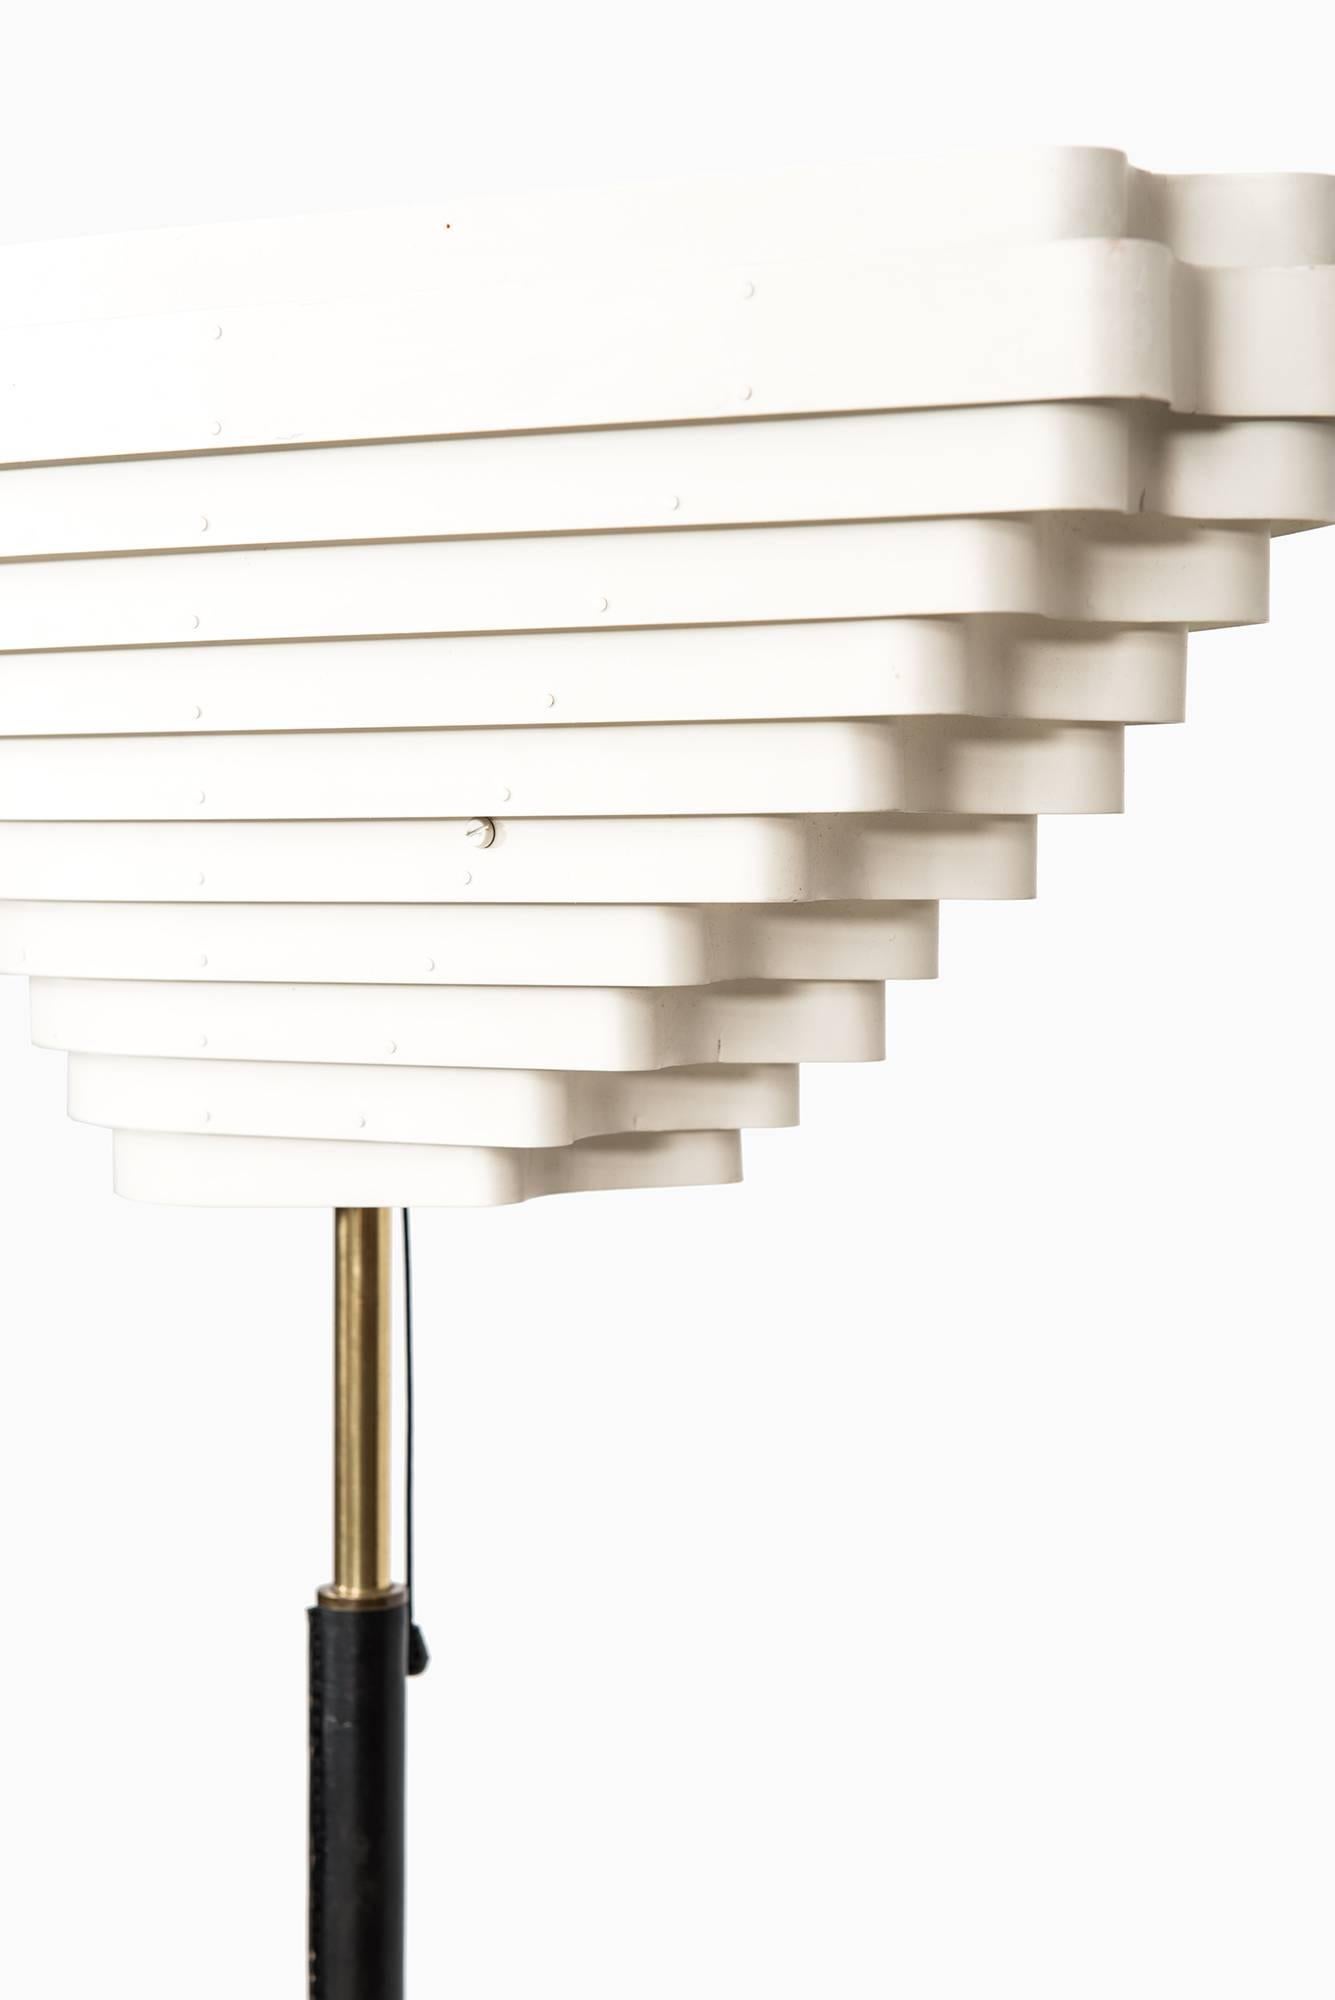 Rare and first production angel wing floor lamp model A805 designed by Alvar Aalto. Produced by Valaistustyö in Finland.